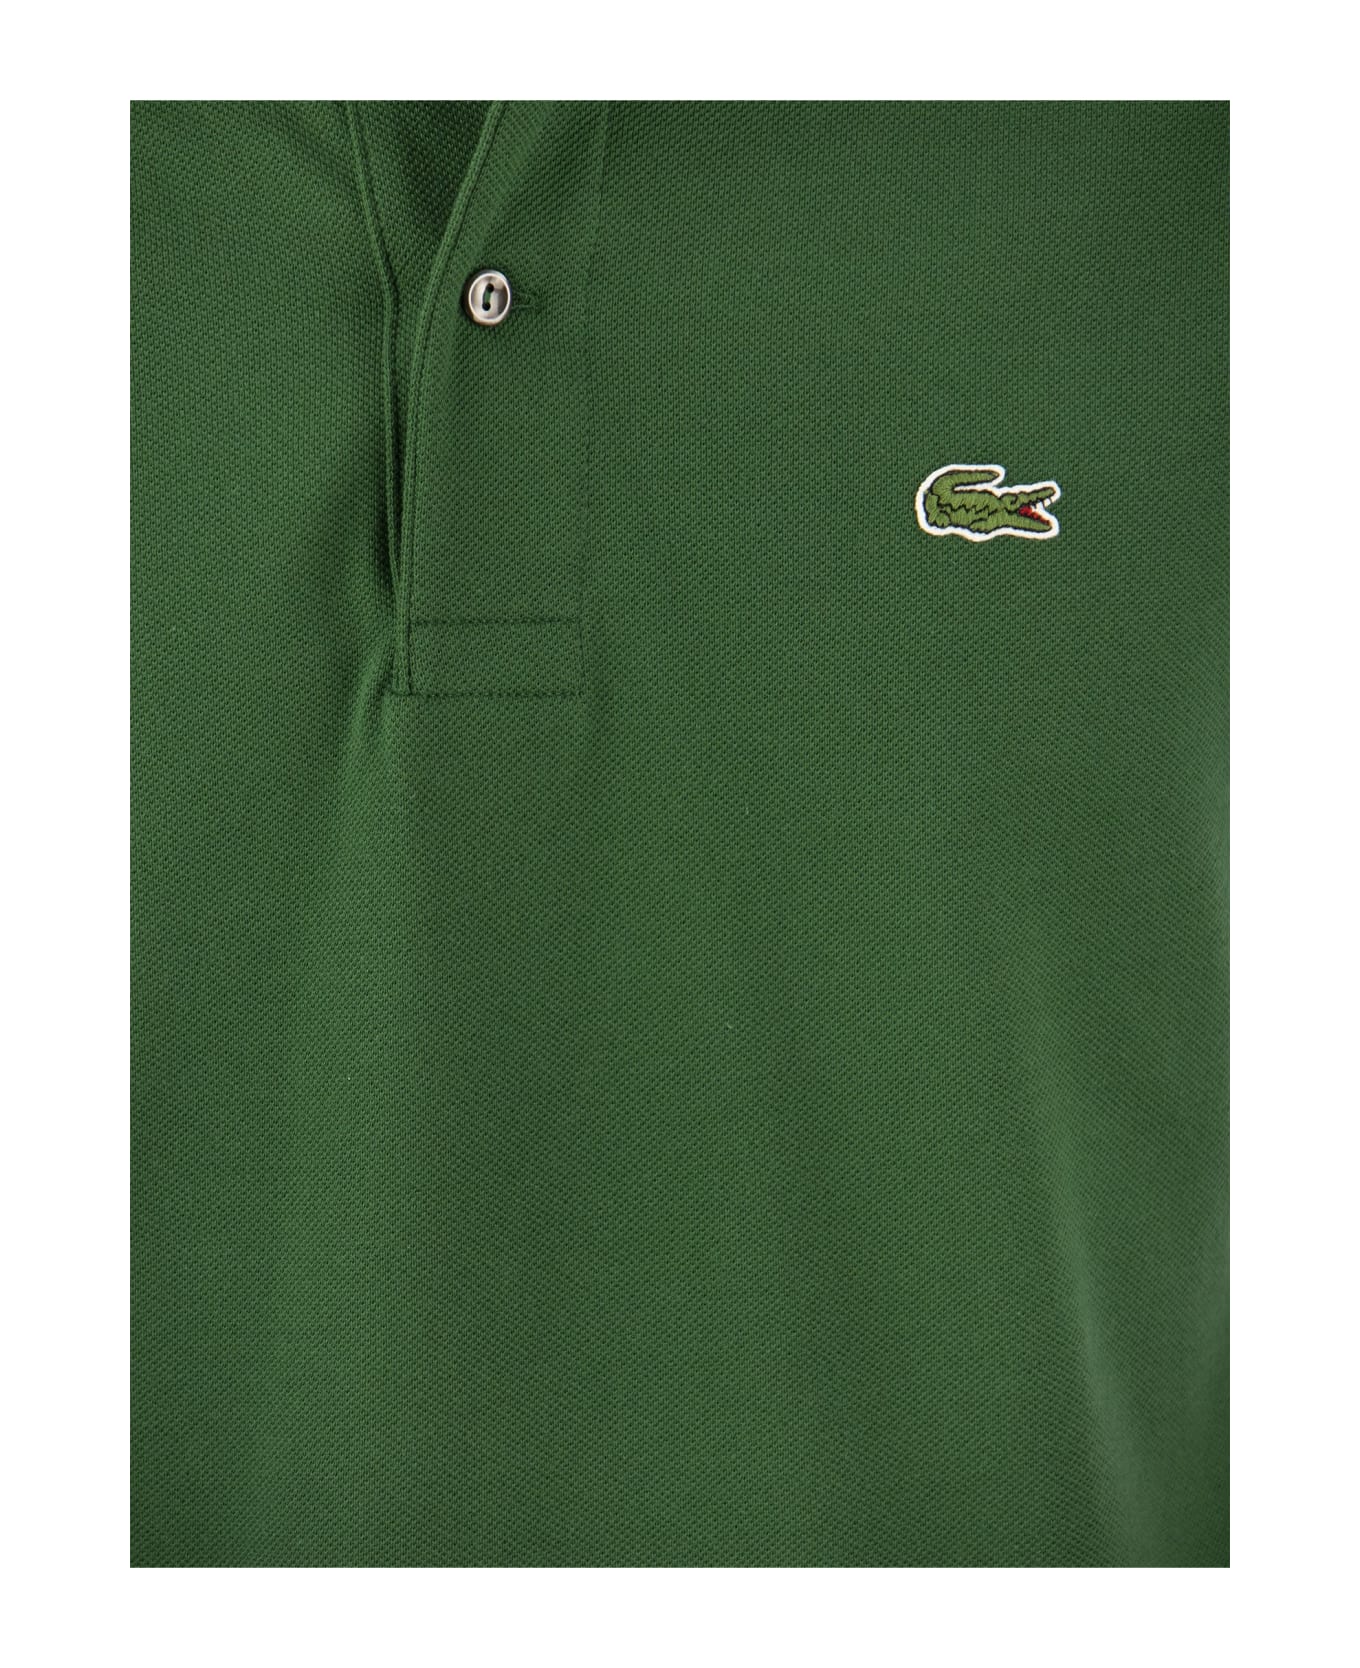 Lacoste Classic Fit Cotton Pique Polo Shirt - Green ポロシャツ